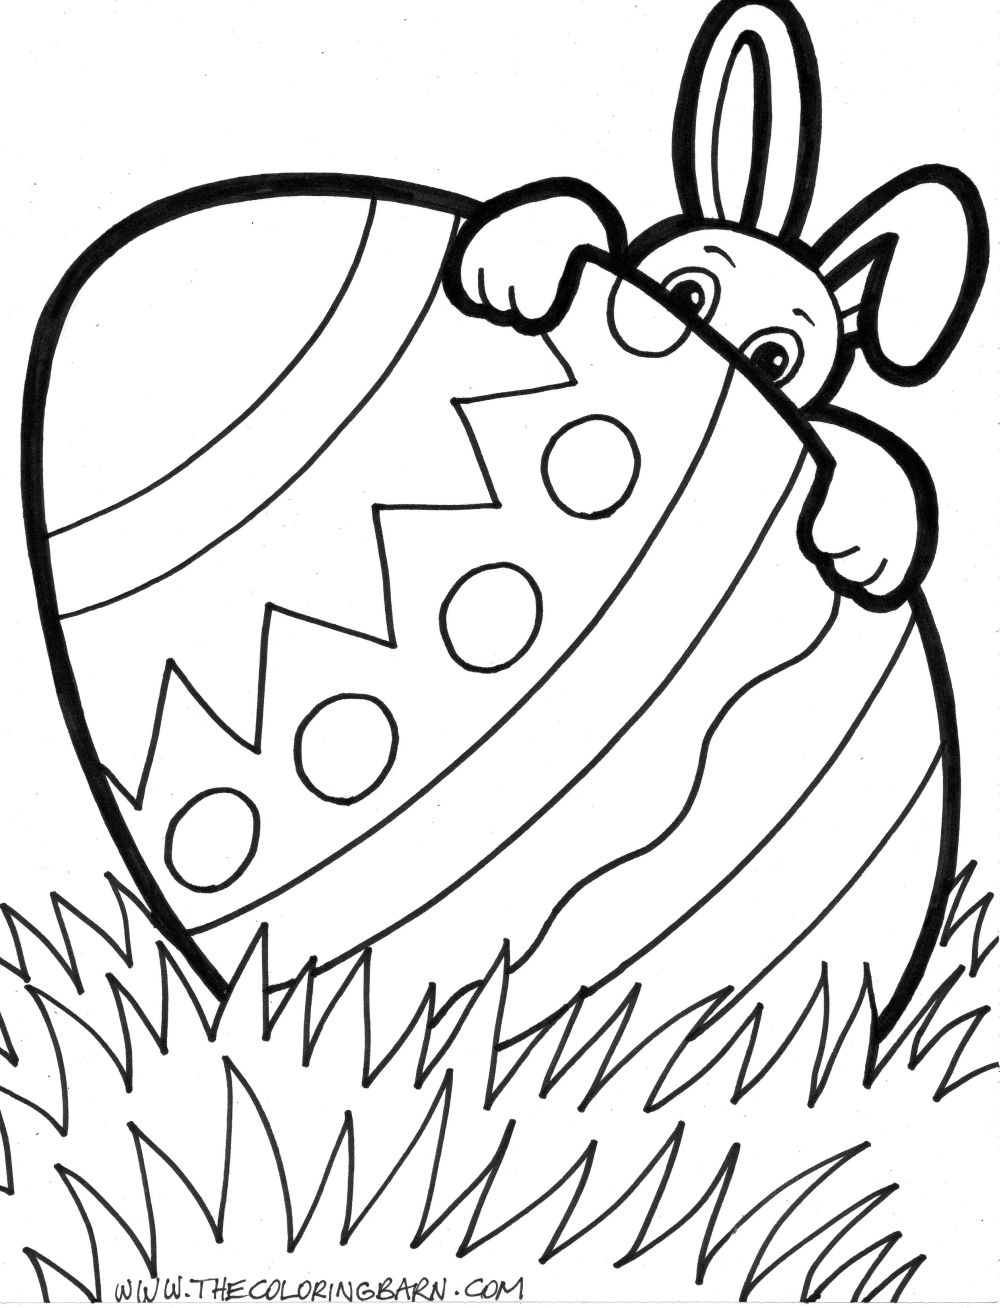 free-printable-easter-bunny-coloring-pages-for-kids